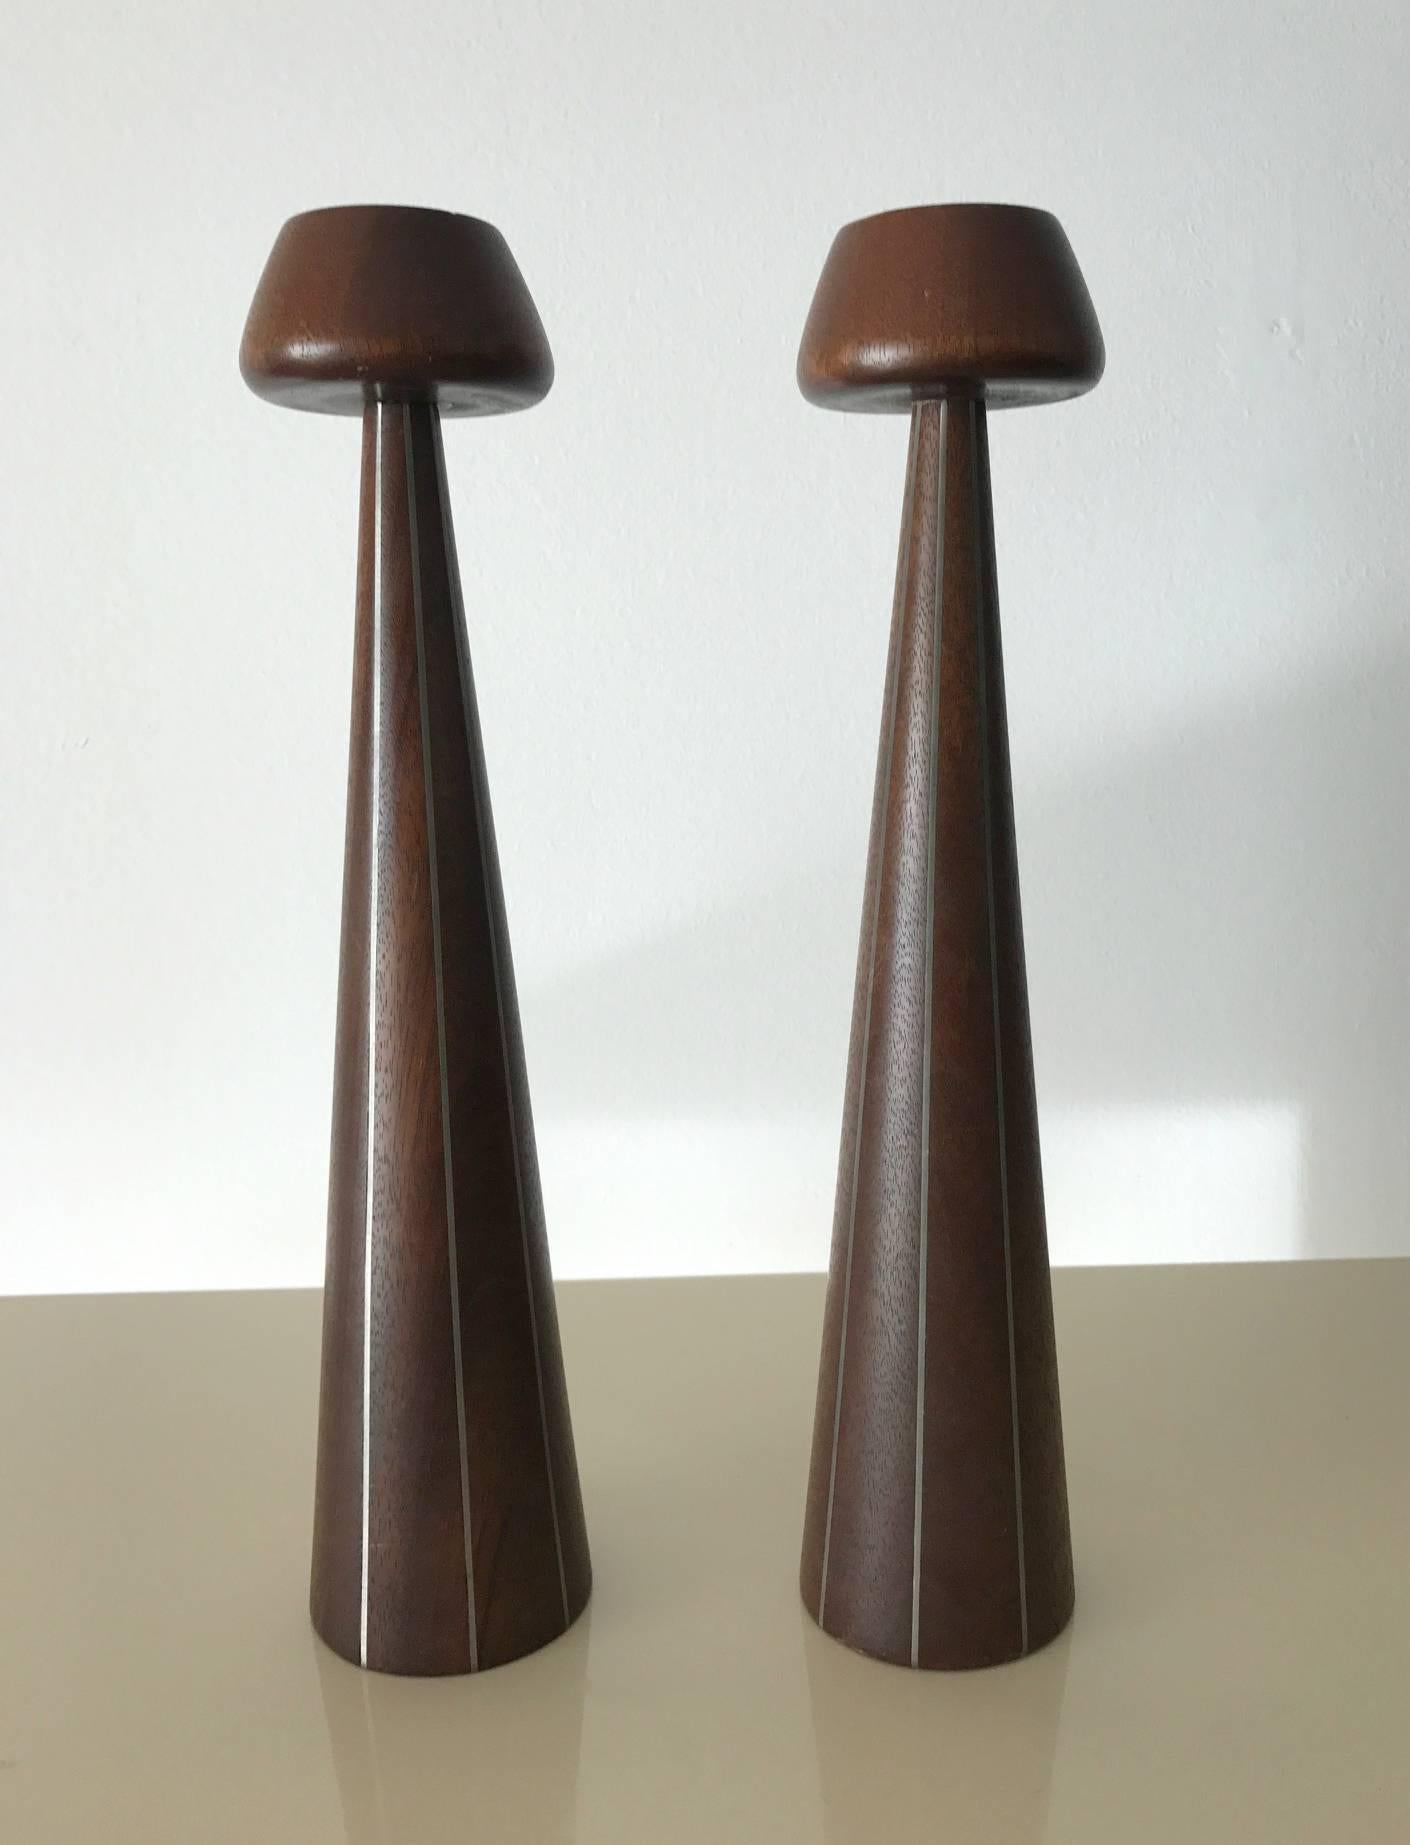 A design from Designers Inc, an early collaboration between Paul Evans and Phillip Lloyd Powell in the 1950s where they had their studios and joined showroom in New Hope, PA. The pair of candlesticks featured turned walnut with pewter inlays. As